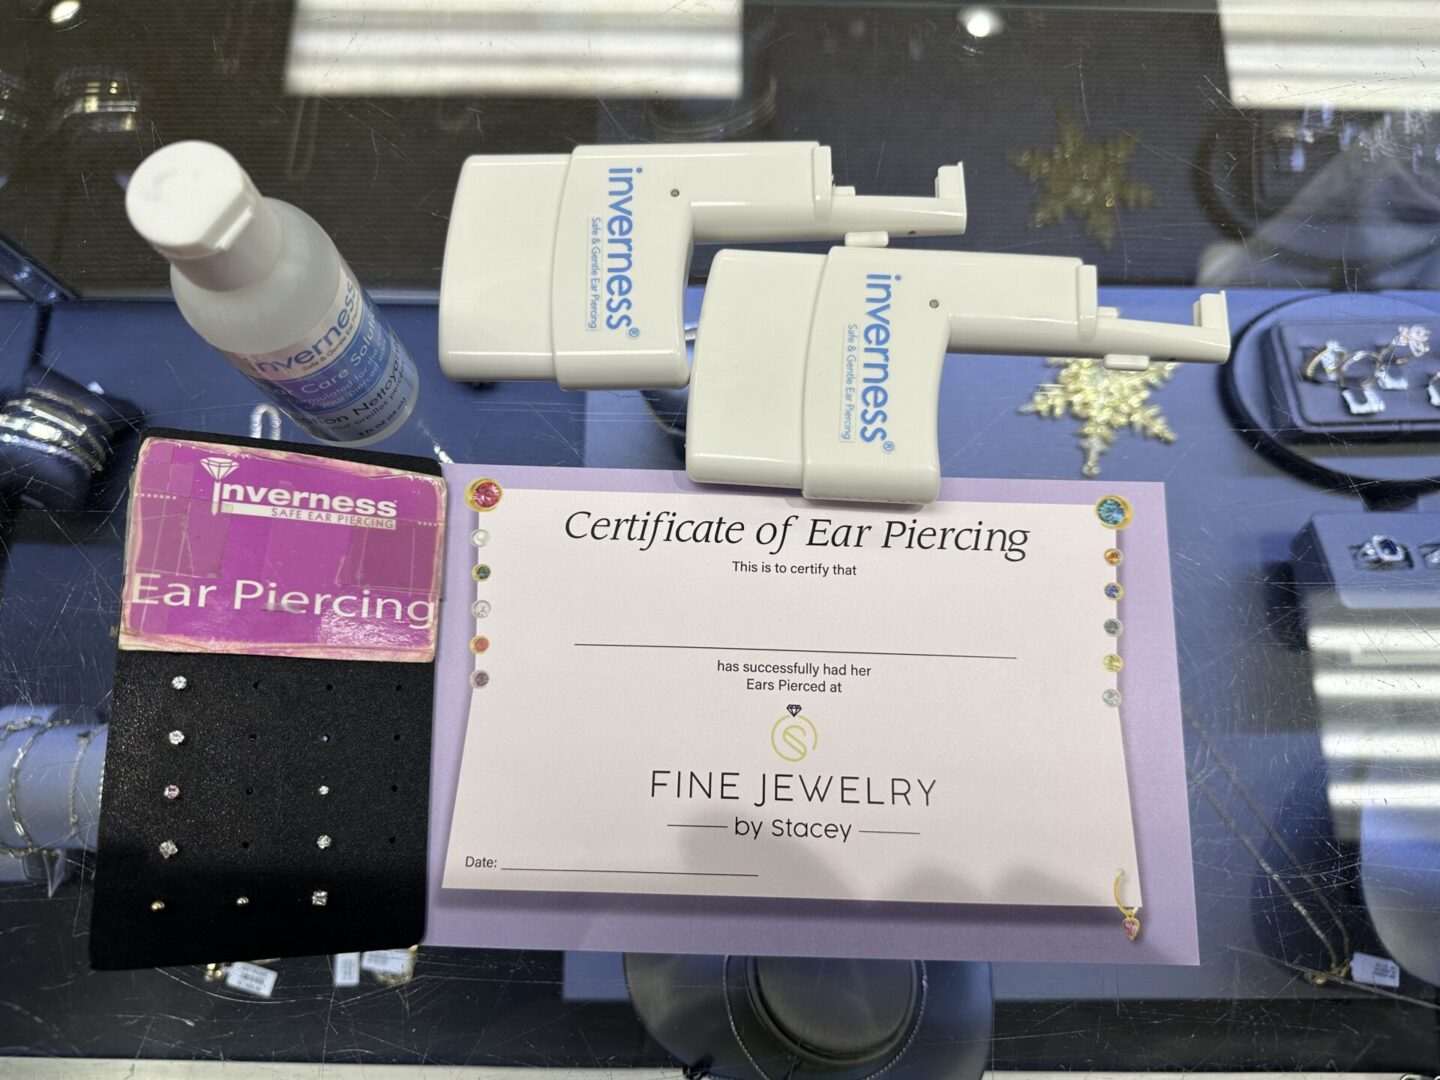 A certificate of ear piercing and some other items.